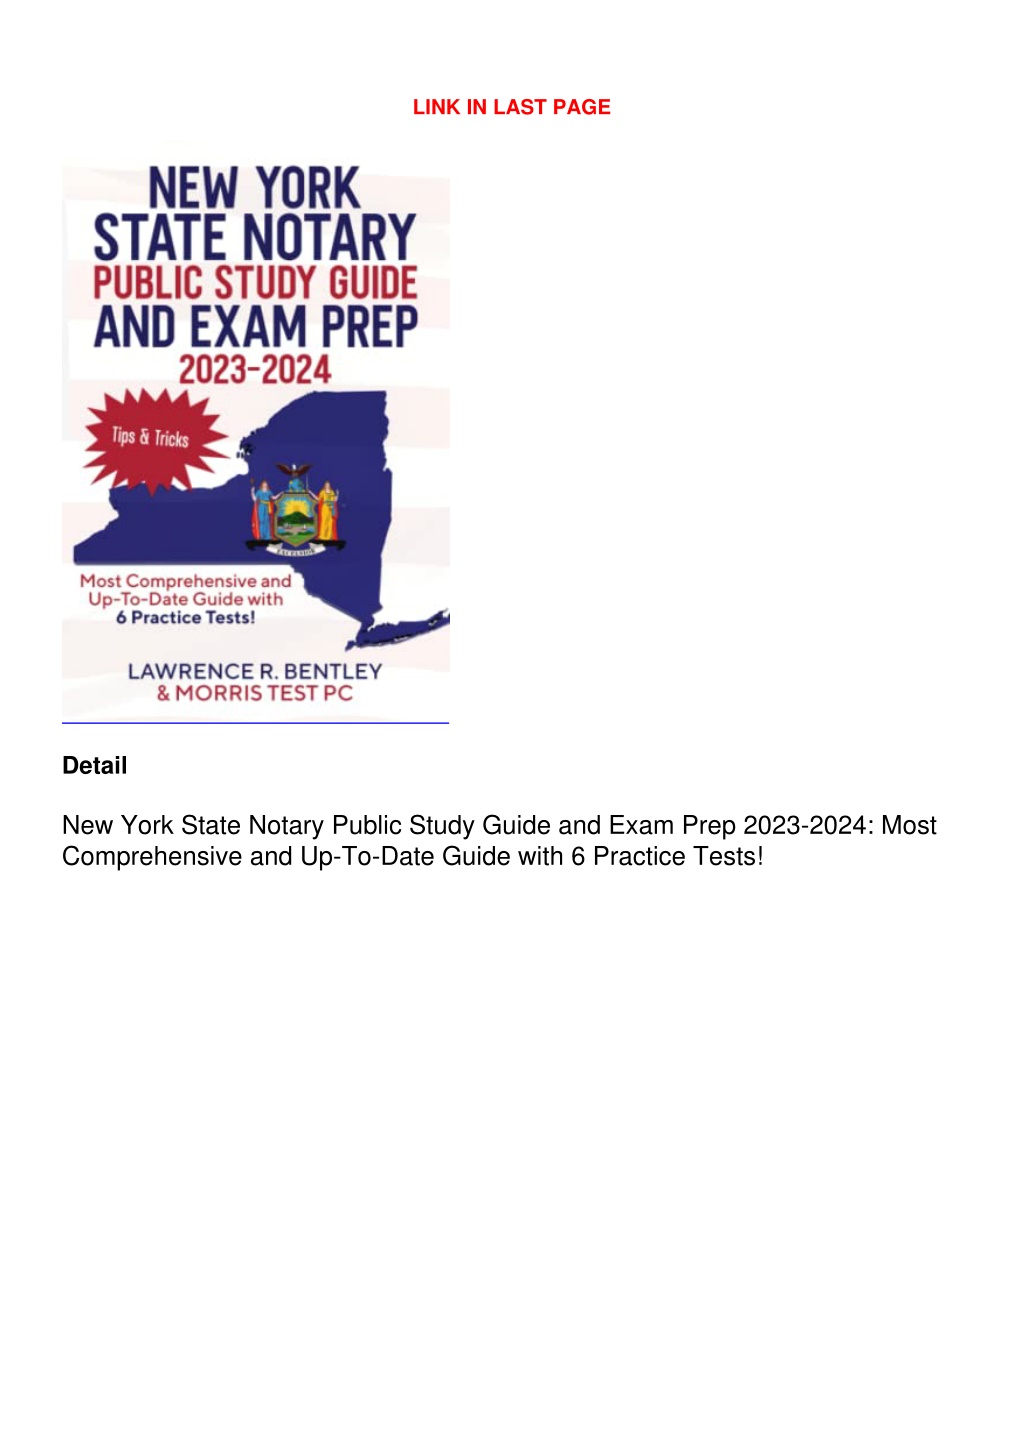 PPT READ [PDF] New York State Notary Public Study Guide and Exam Prep